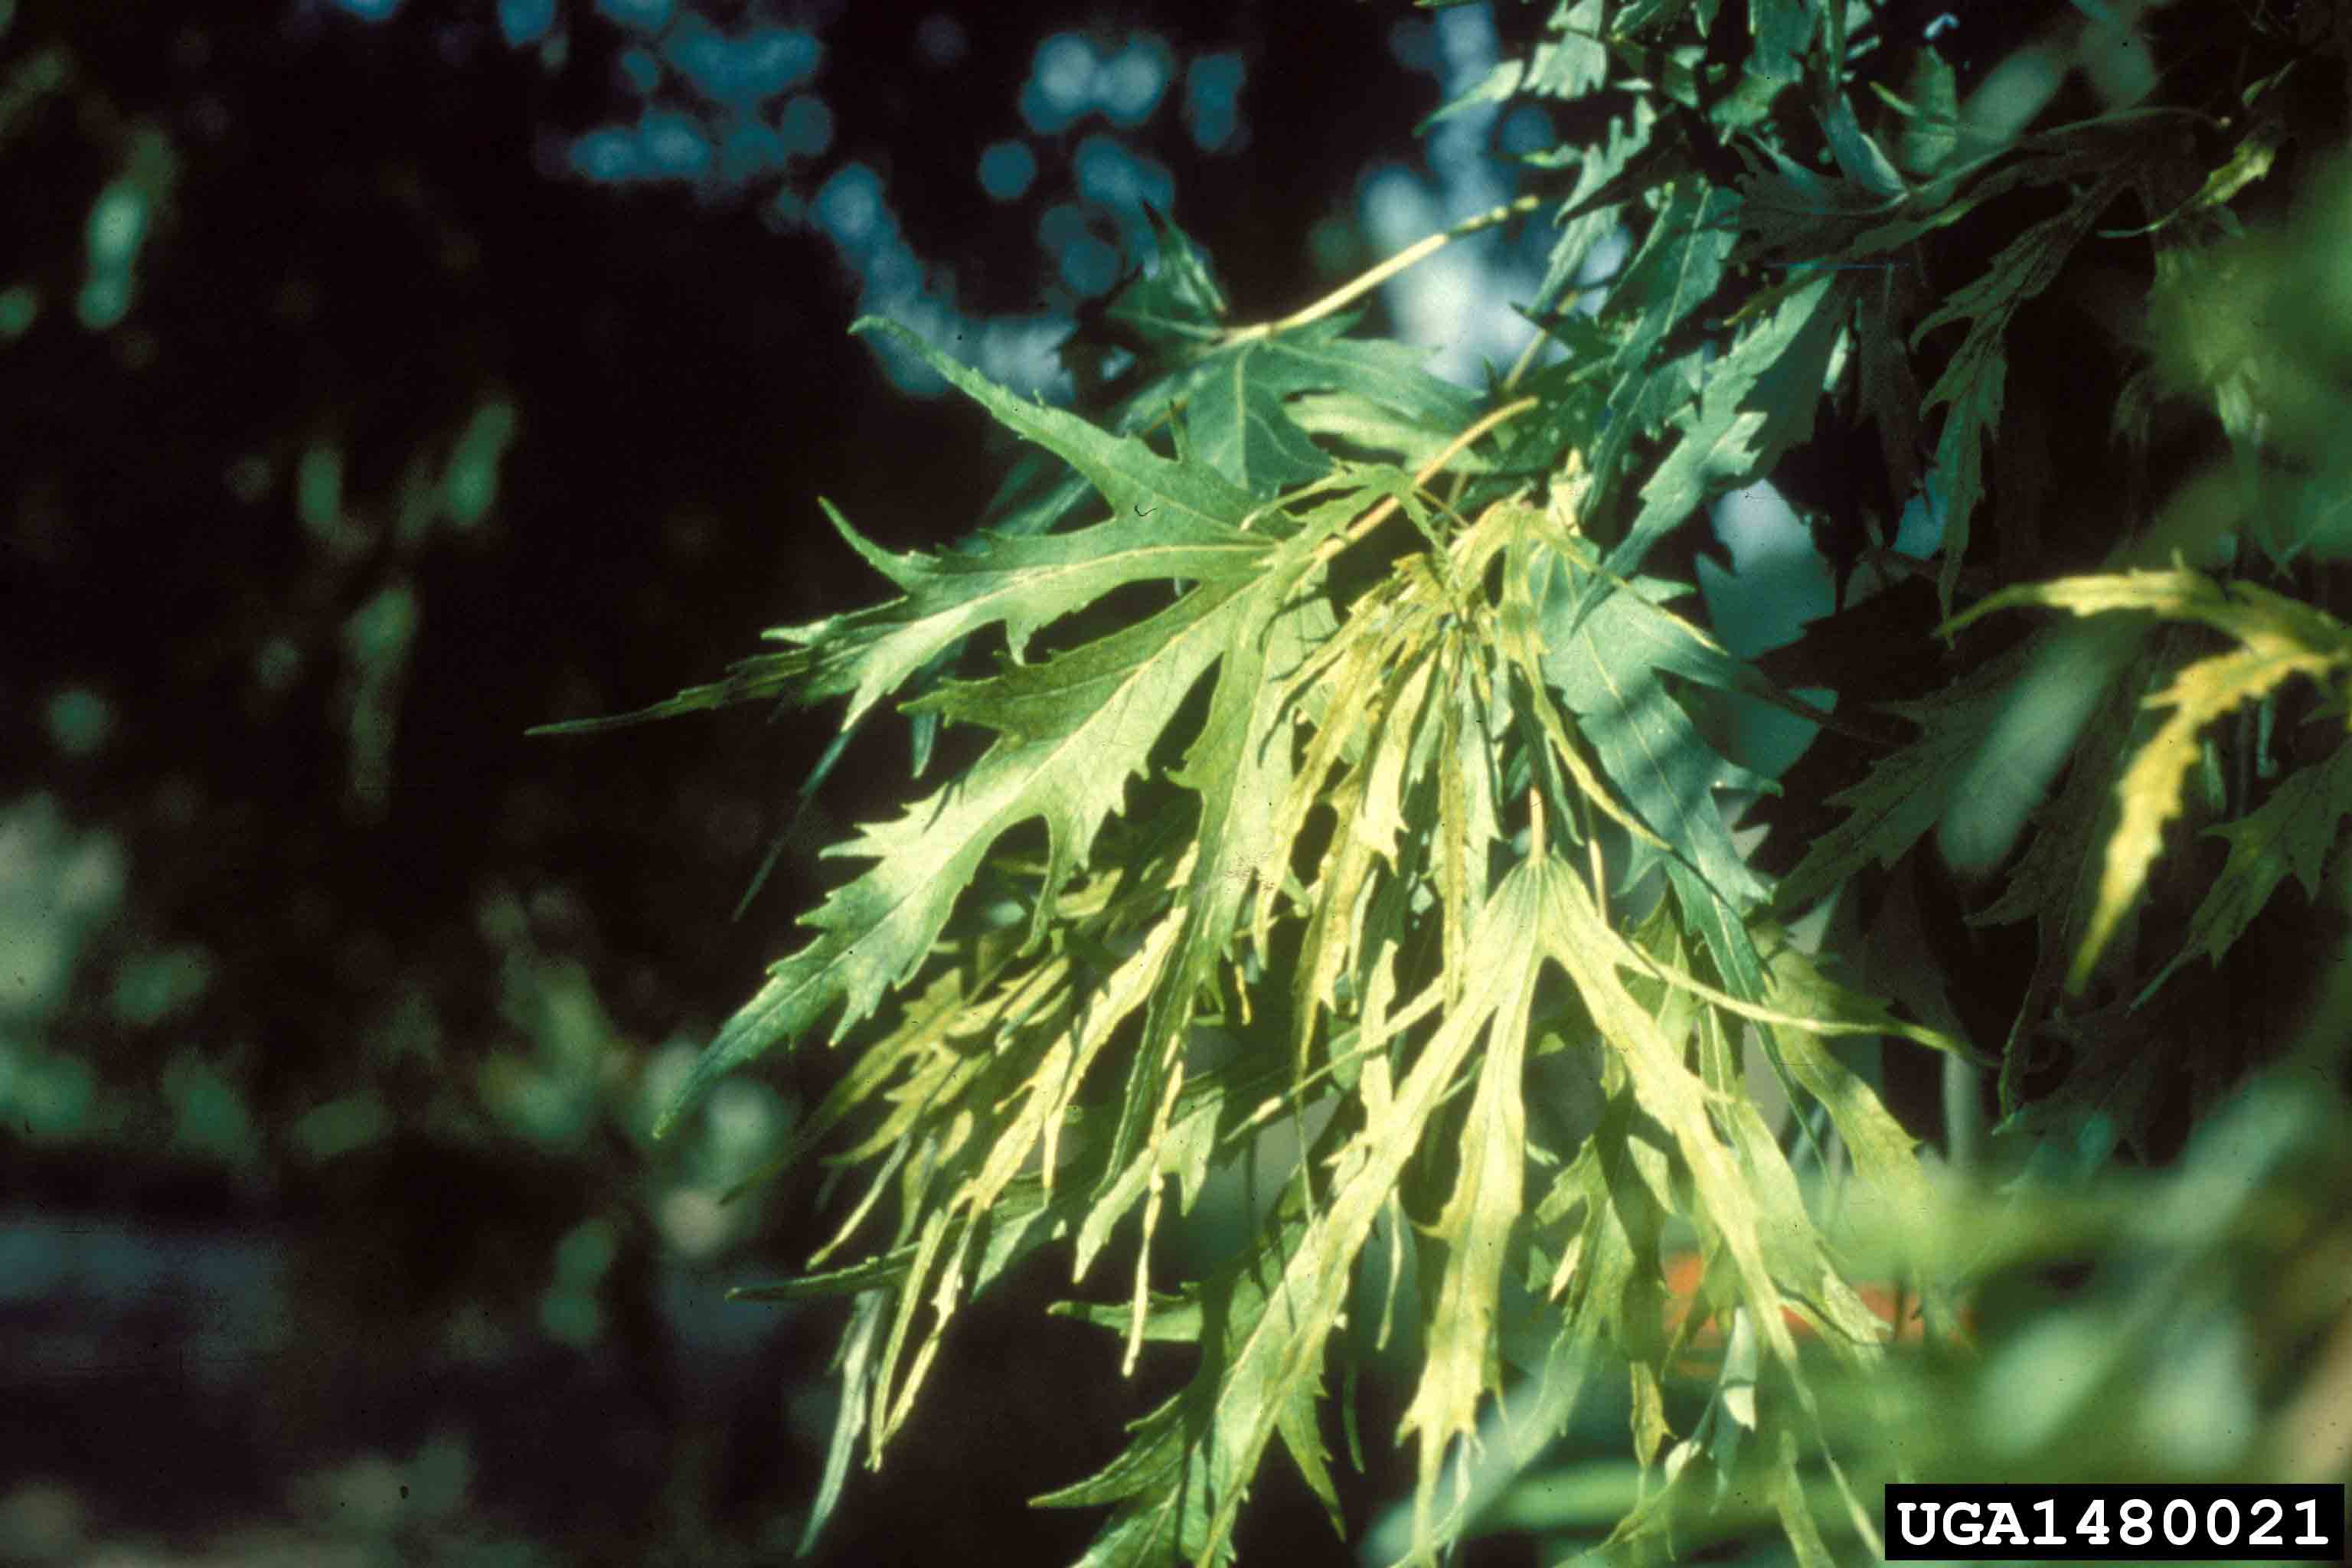 Silver maple leaves, showing deep V-shaped lobes